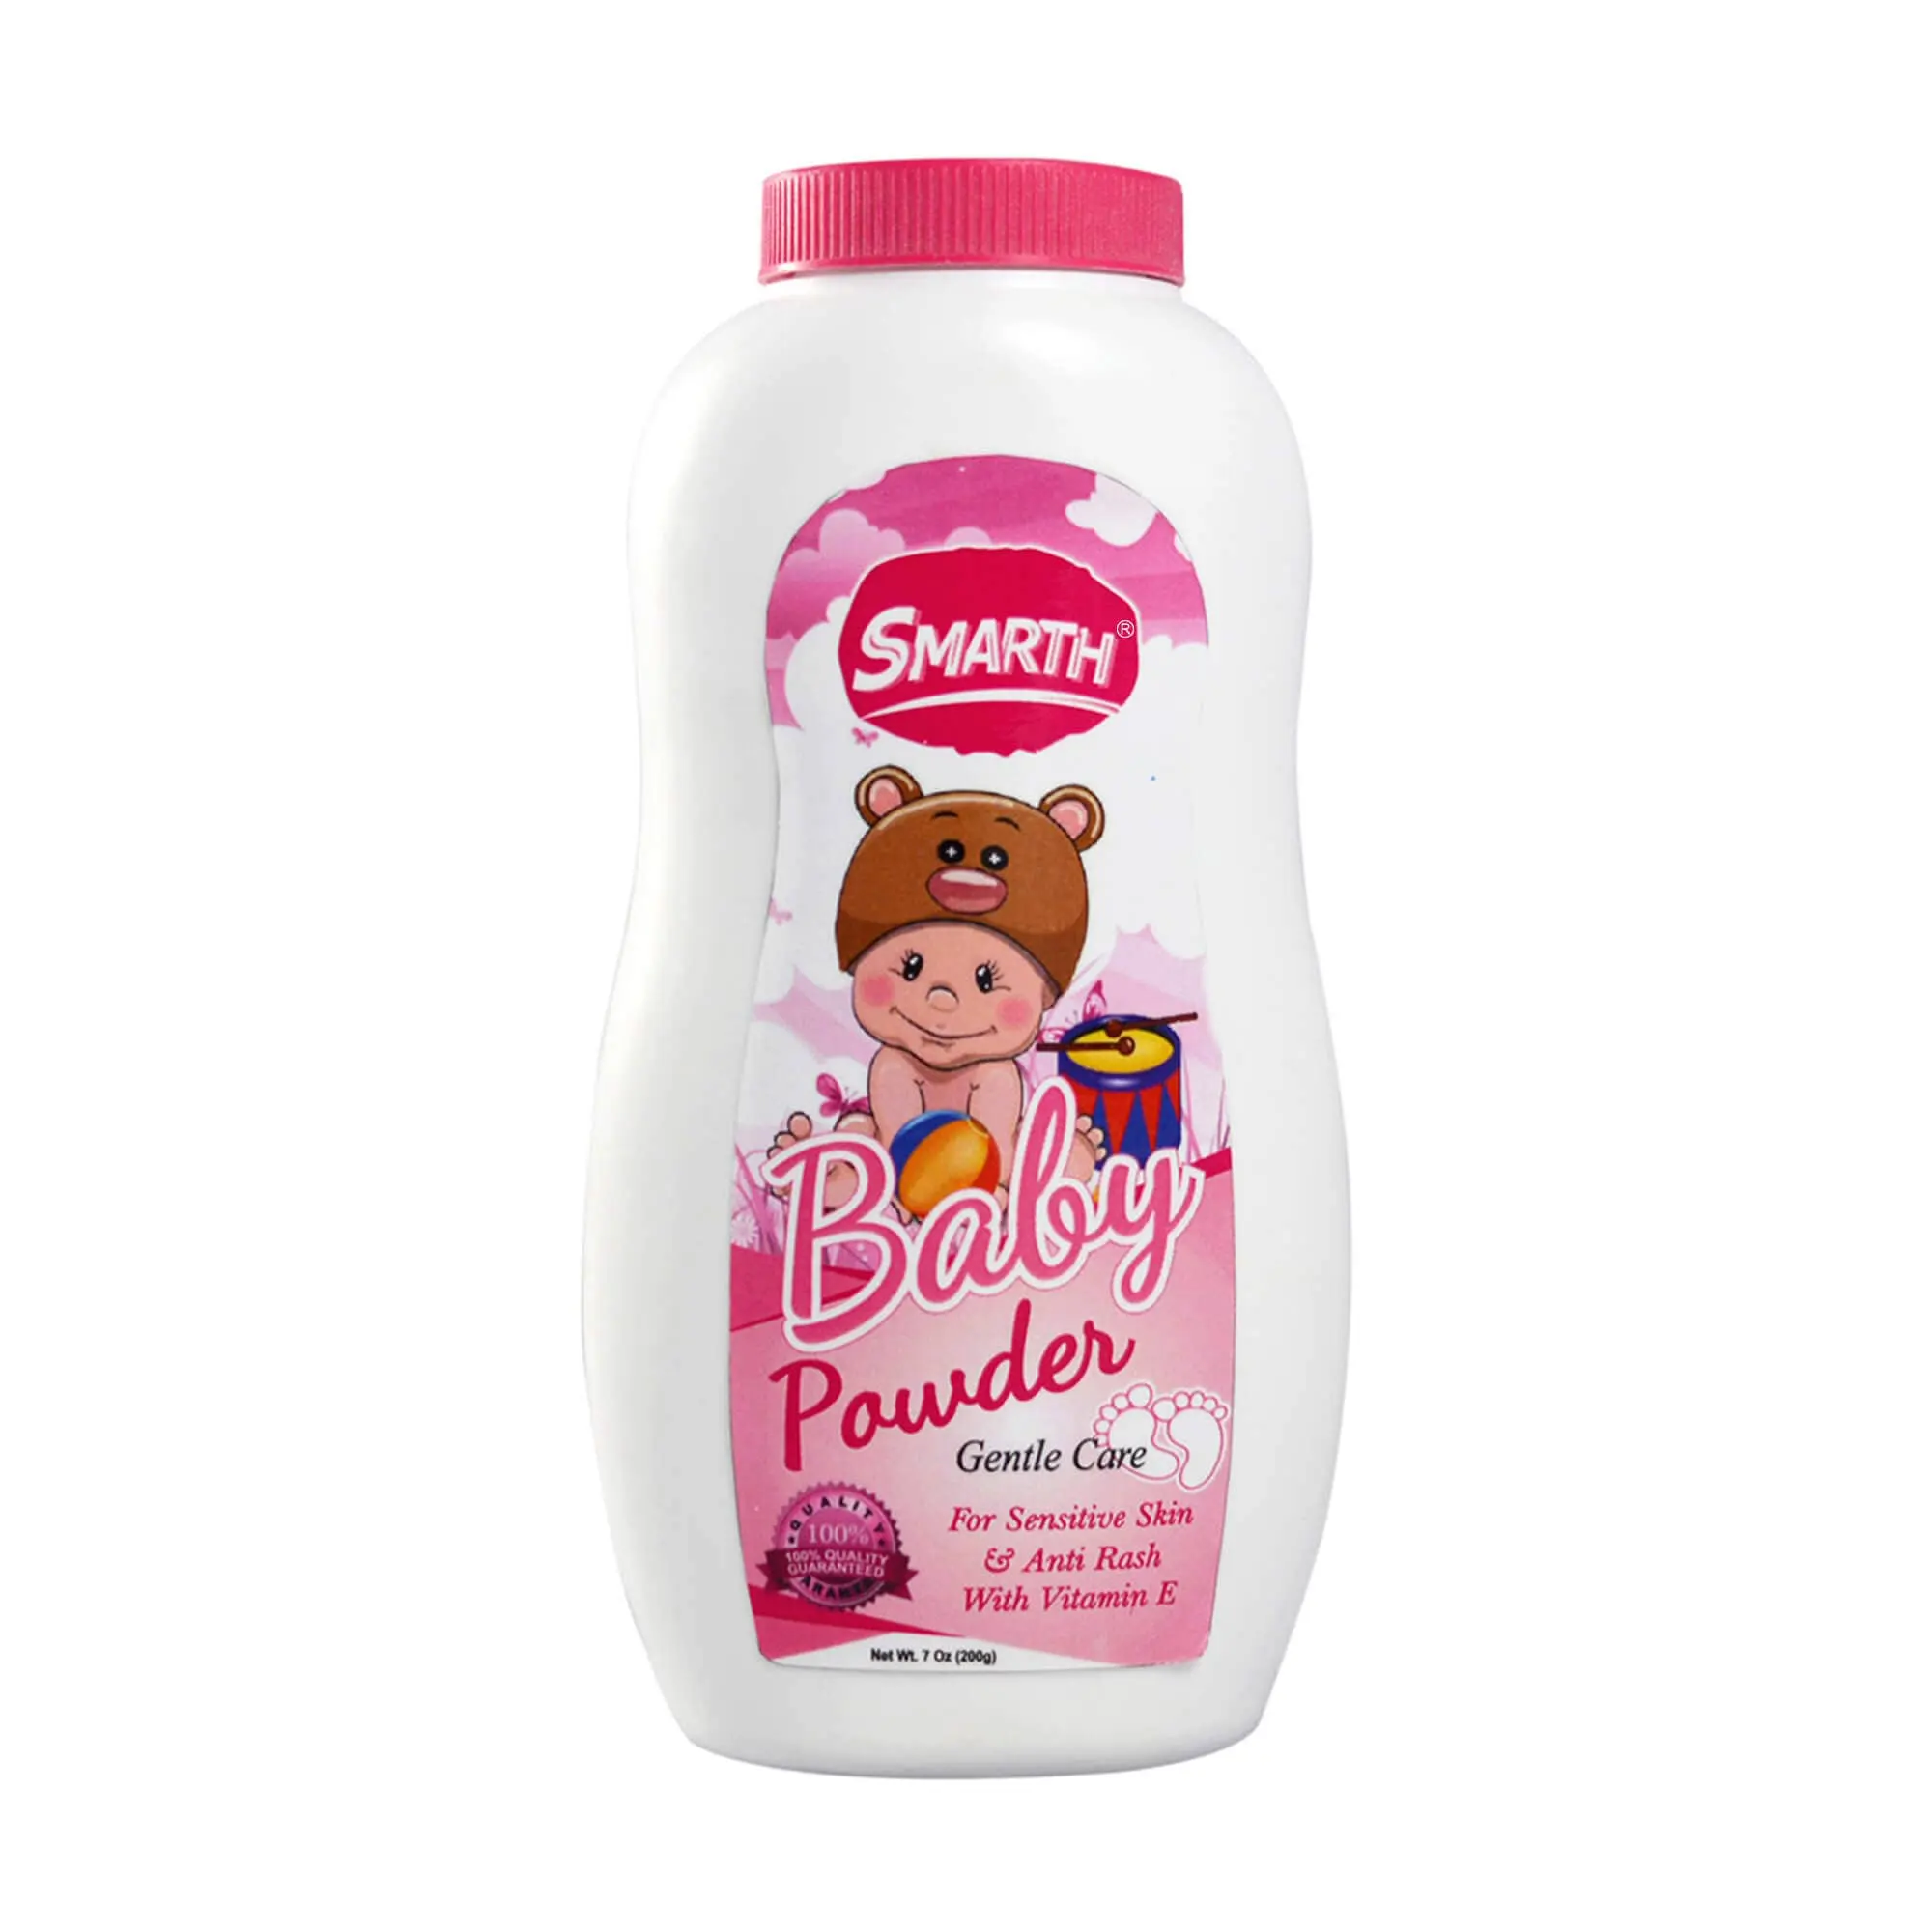 Gentle Care Baby Powder Good Quality Wholesale Natural Baby Powder from Trusted Exporter in best Price